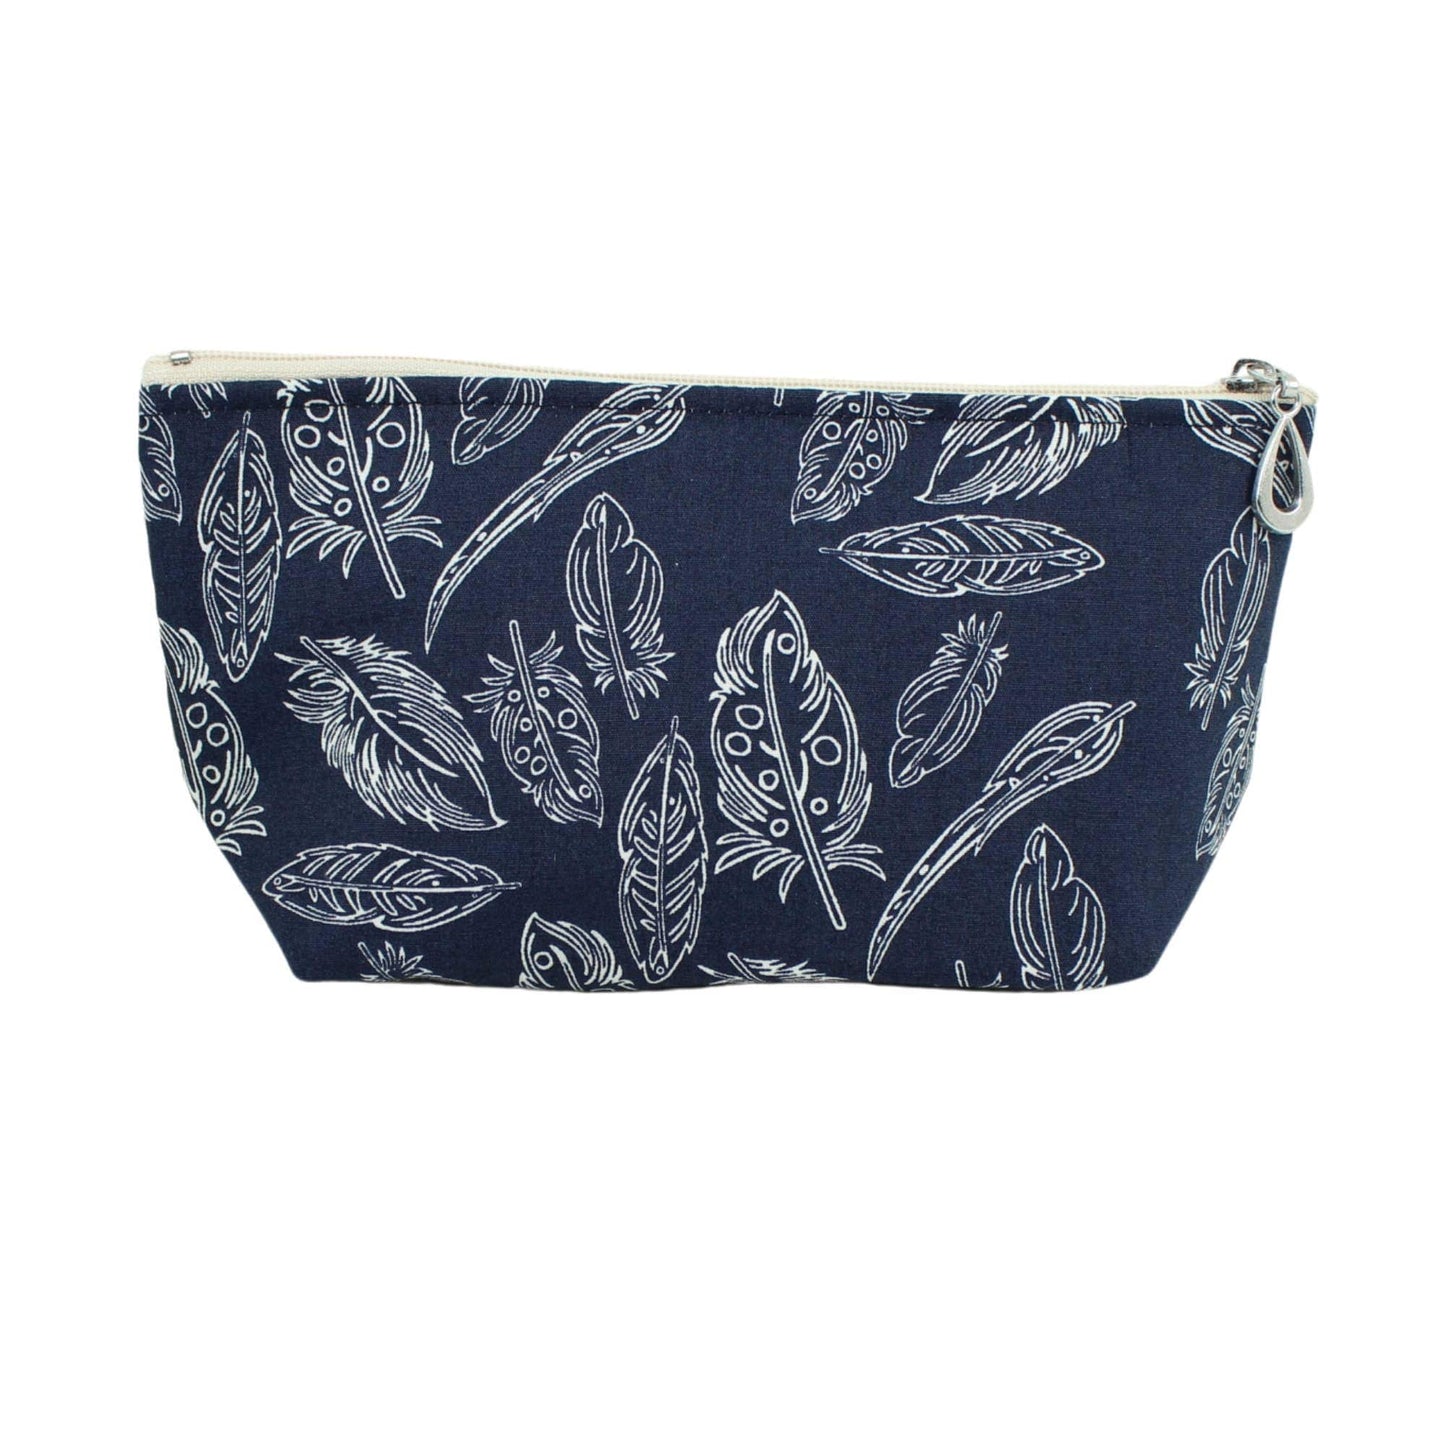 ACC The Small Make Up Bag - Feathers on Navy